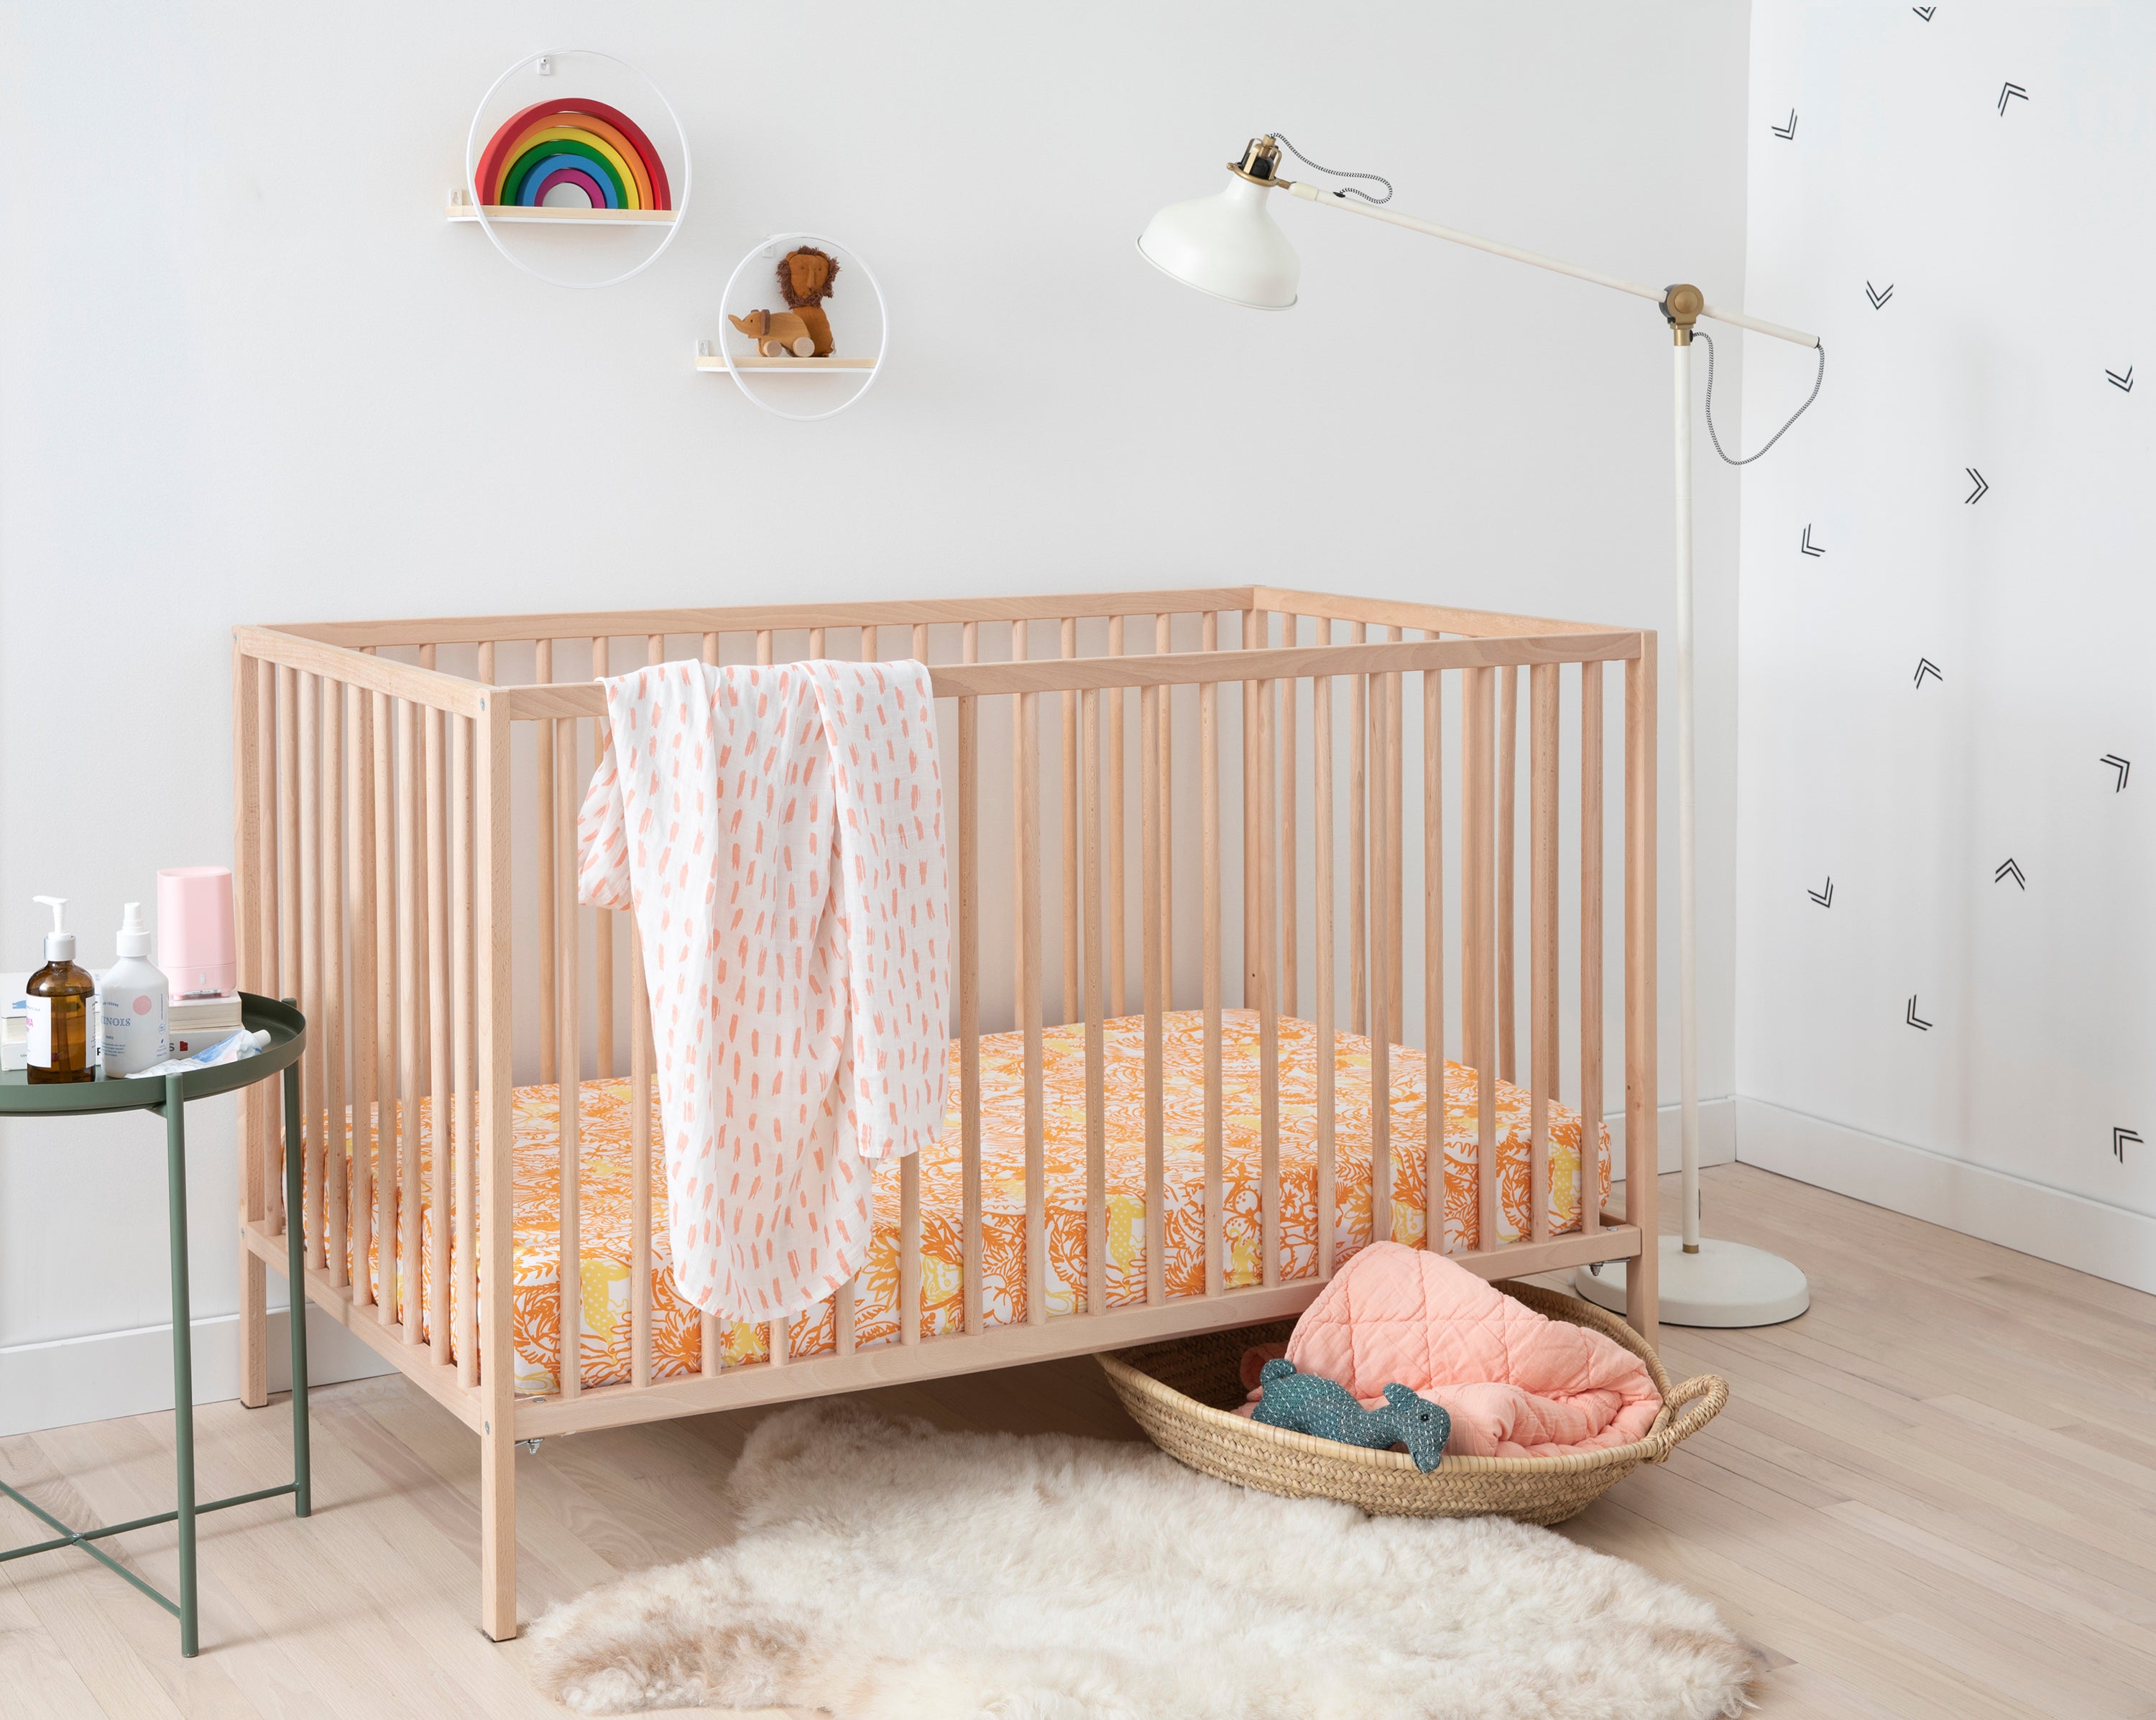 Brooklinen's Crib Sheet Set in "Jungle in Orange," paired with the Baby Quilt and Swaddle in "Blush."